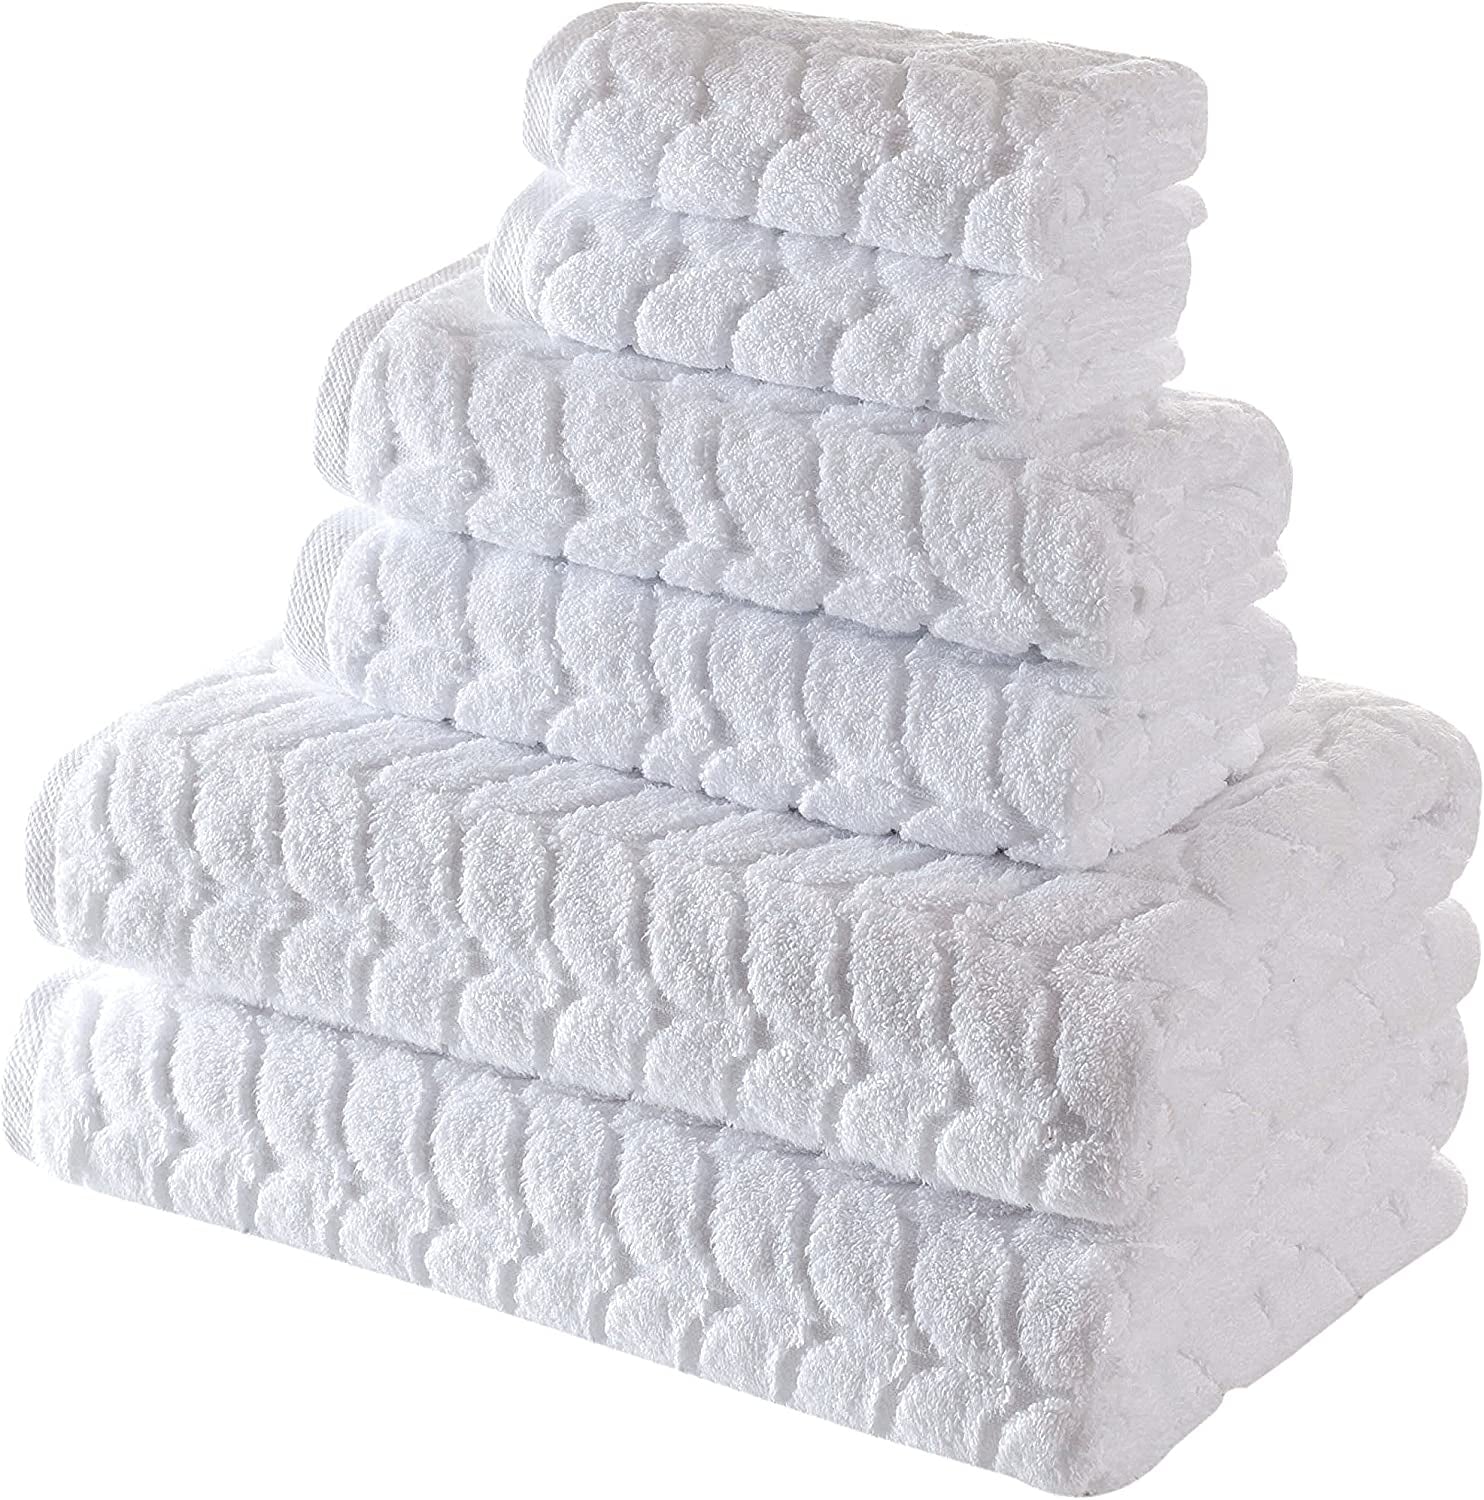 100% Turkish Cotton Jacquard Luxury Quick Dry Non-Gmo Ultra-Soft, Plush and Absorbent Luxury Durable Turkish Towels Set (White, 6 Pcs)